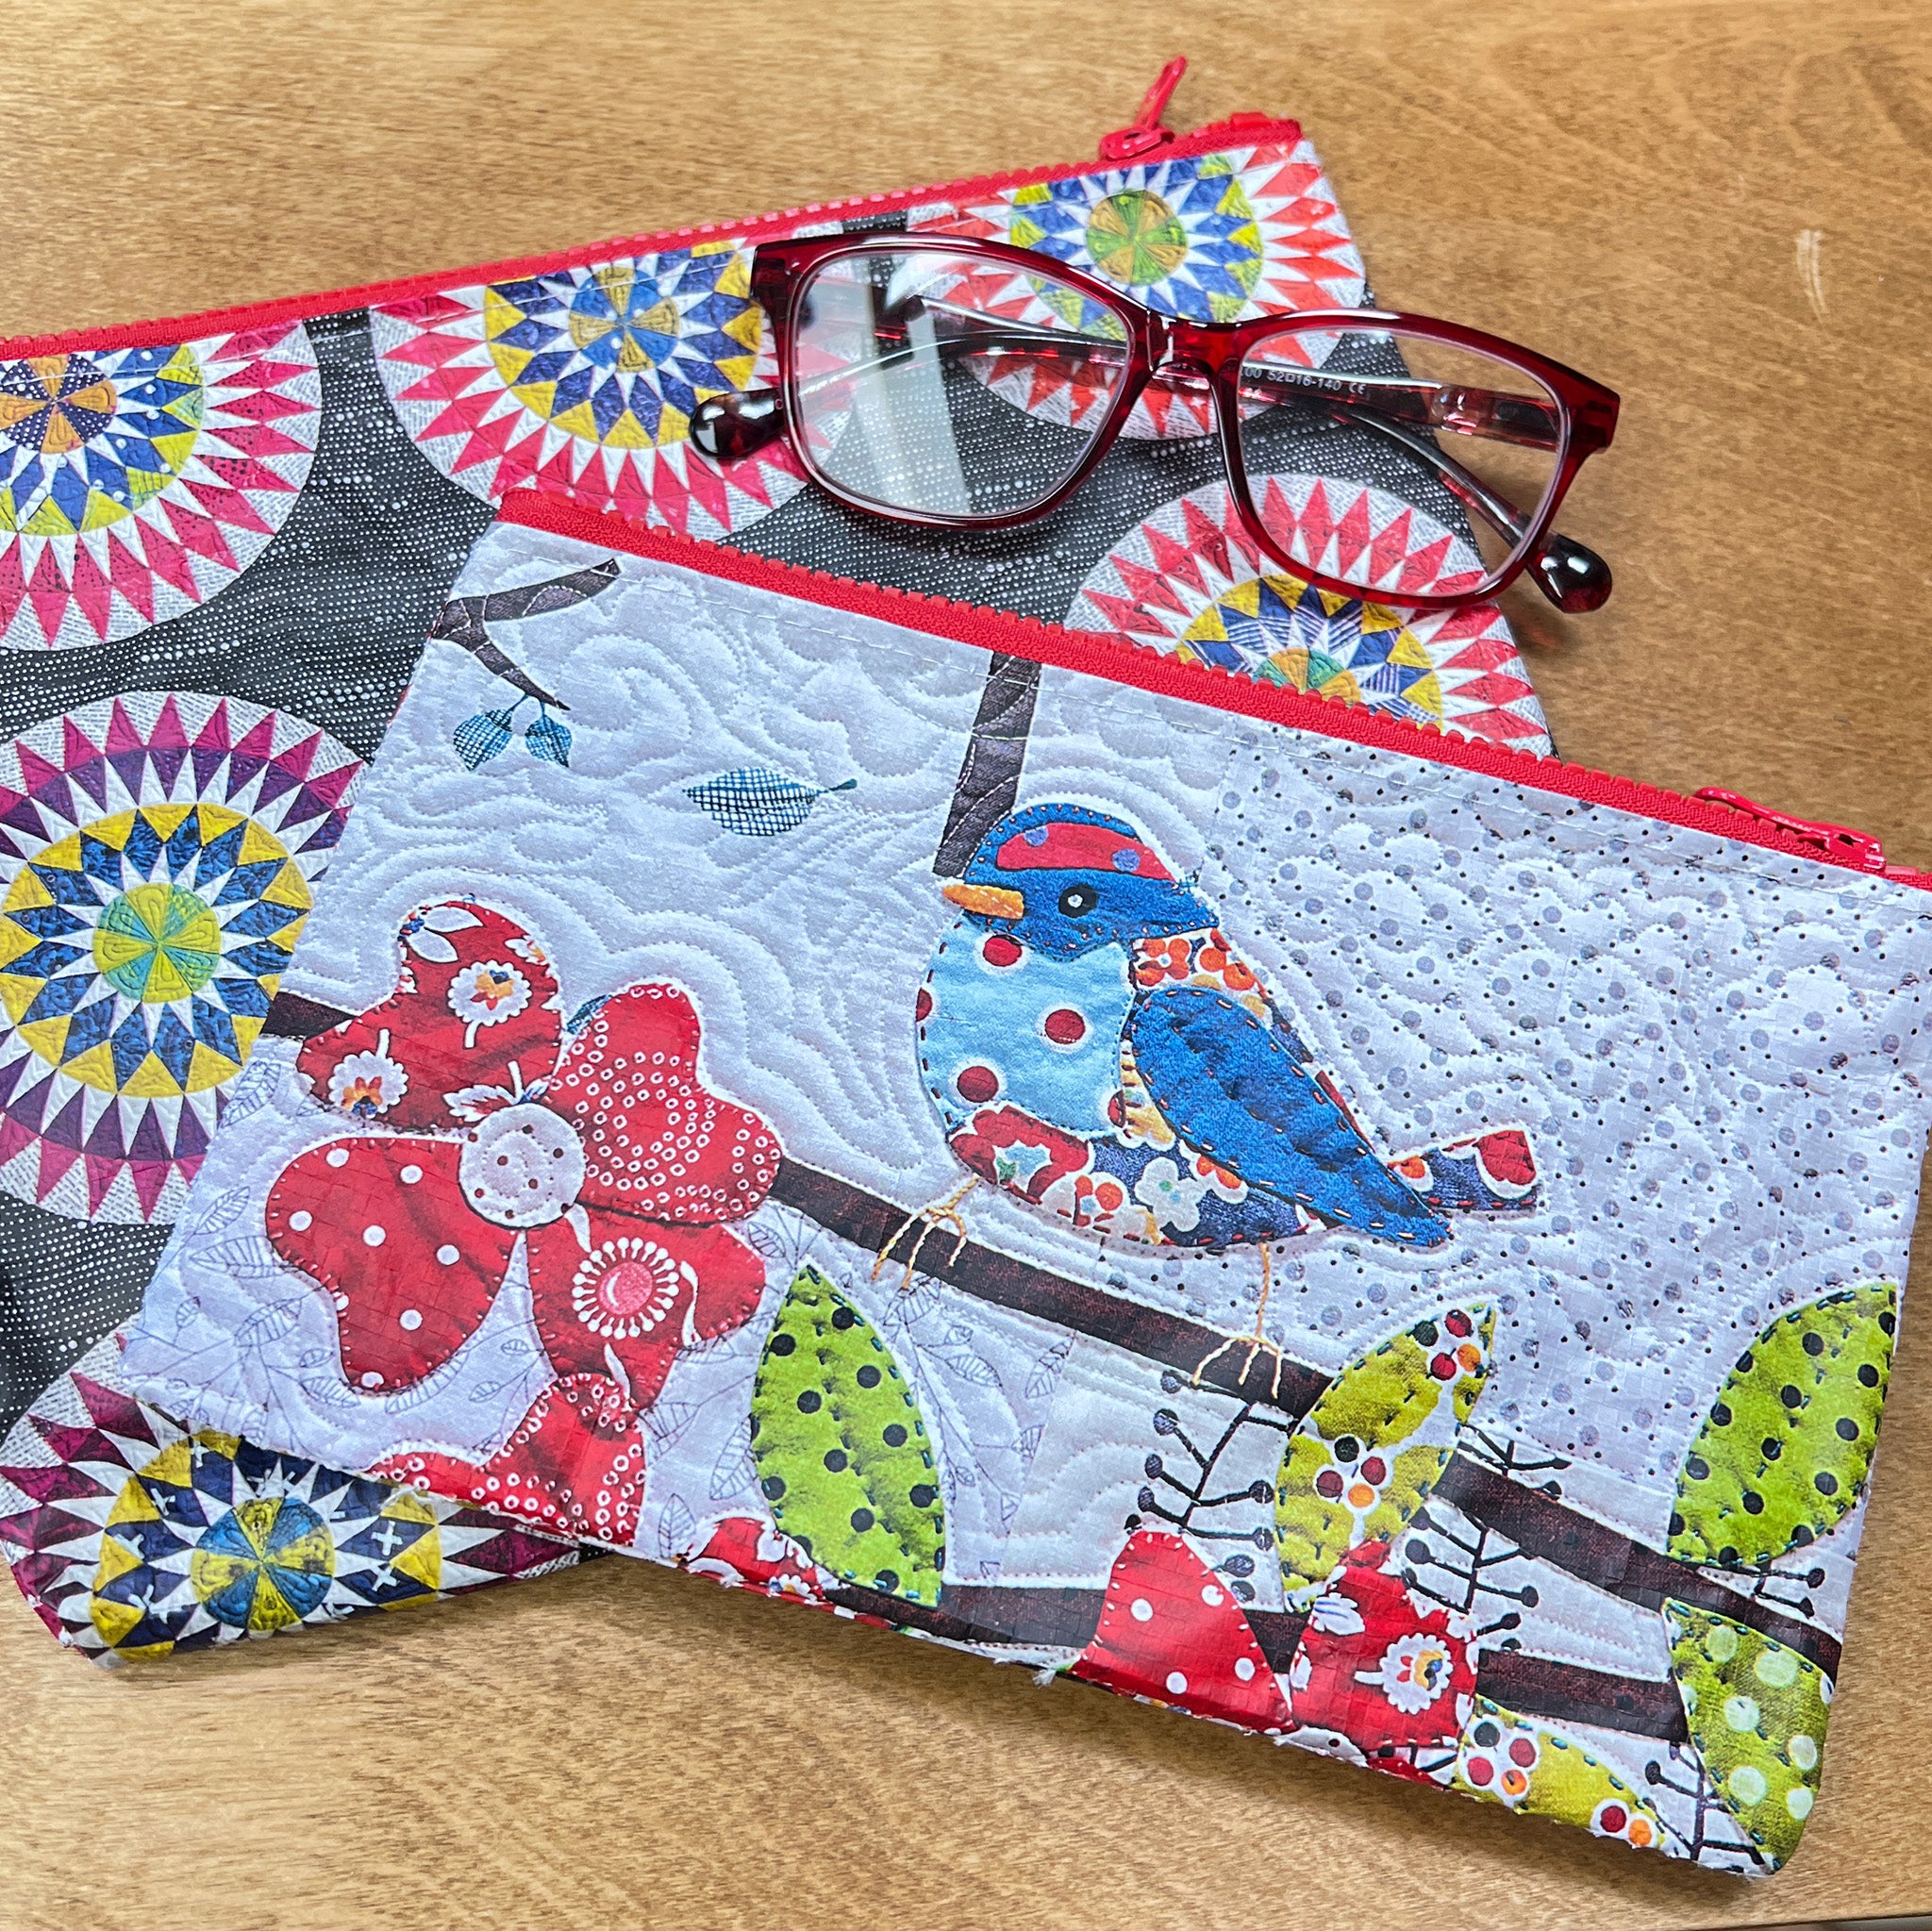 Yazzii Organizers & Bags on Instagram: See our new Yazzii CA530 - Yazzii  Travel Pouch at the upcoming West Coast US shows - Road2CA and Quilt, Craft  & Sewing Festival. 🤩 It's